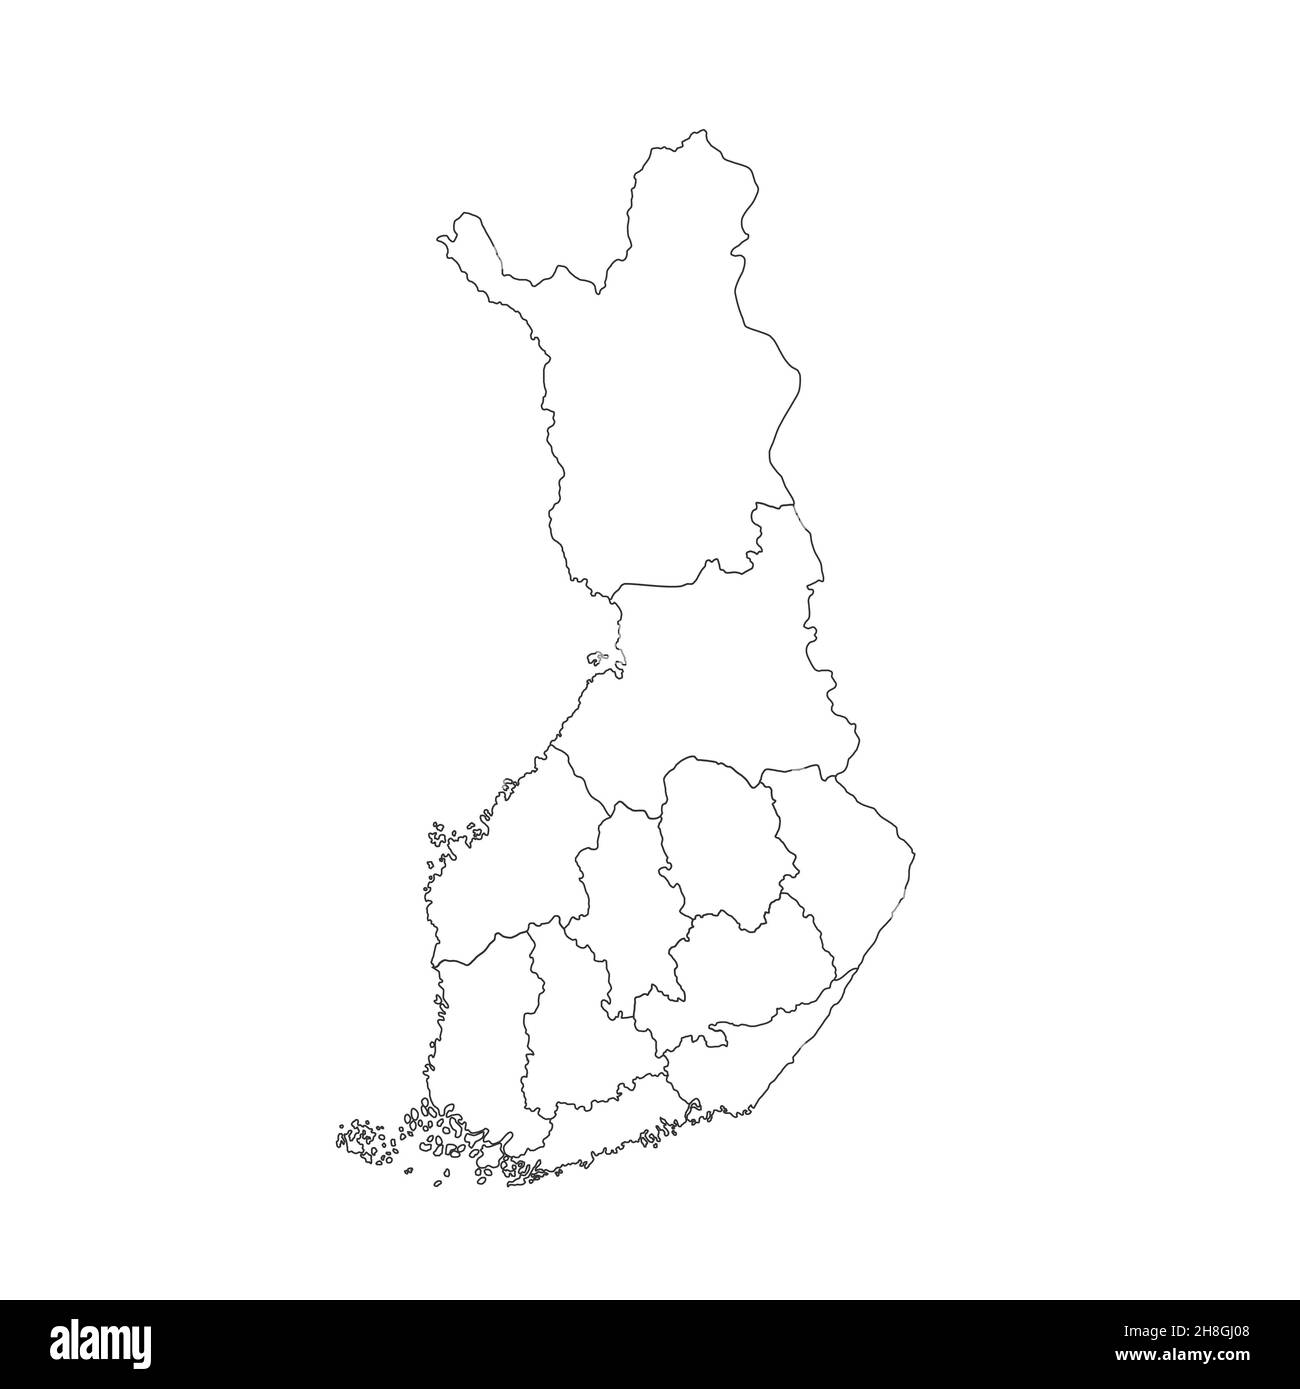 Finland outline map isolated on a white background. Stock Photo